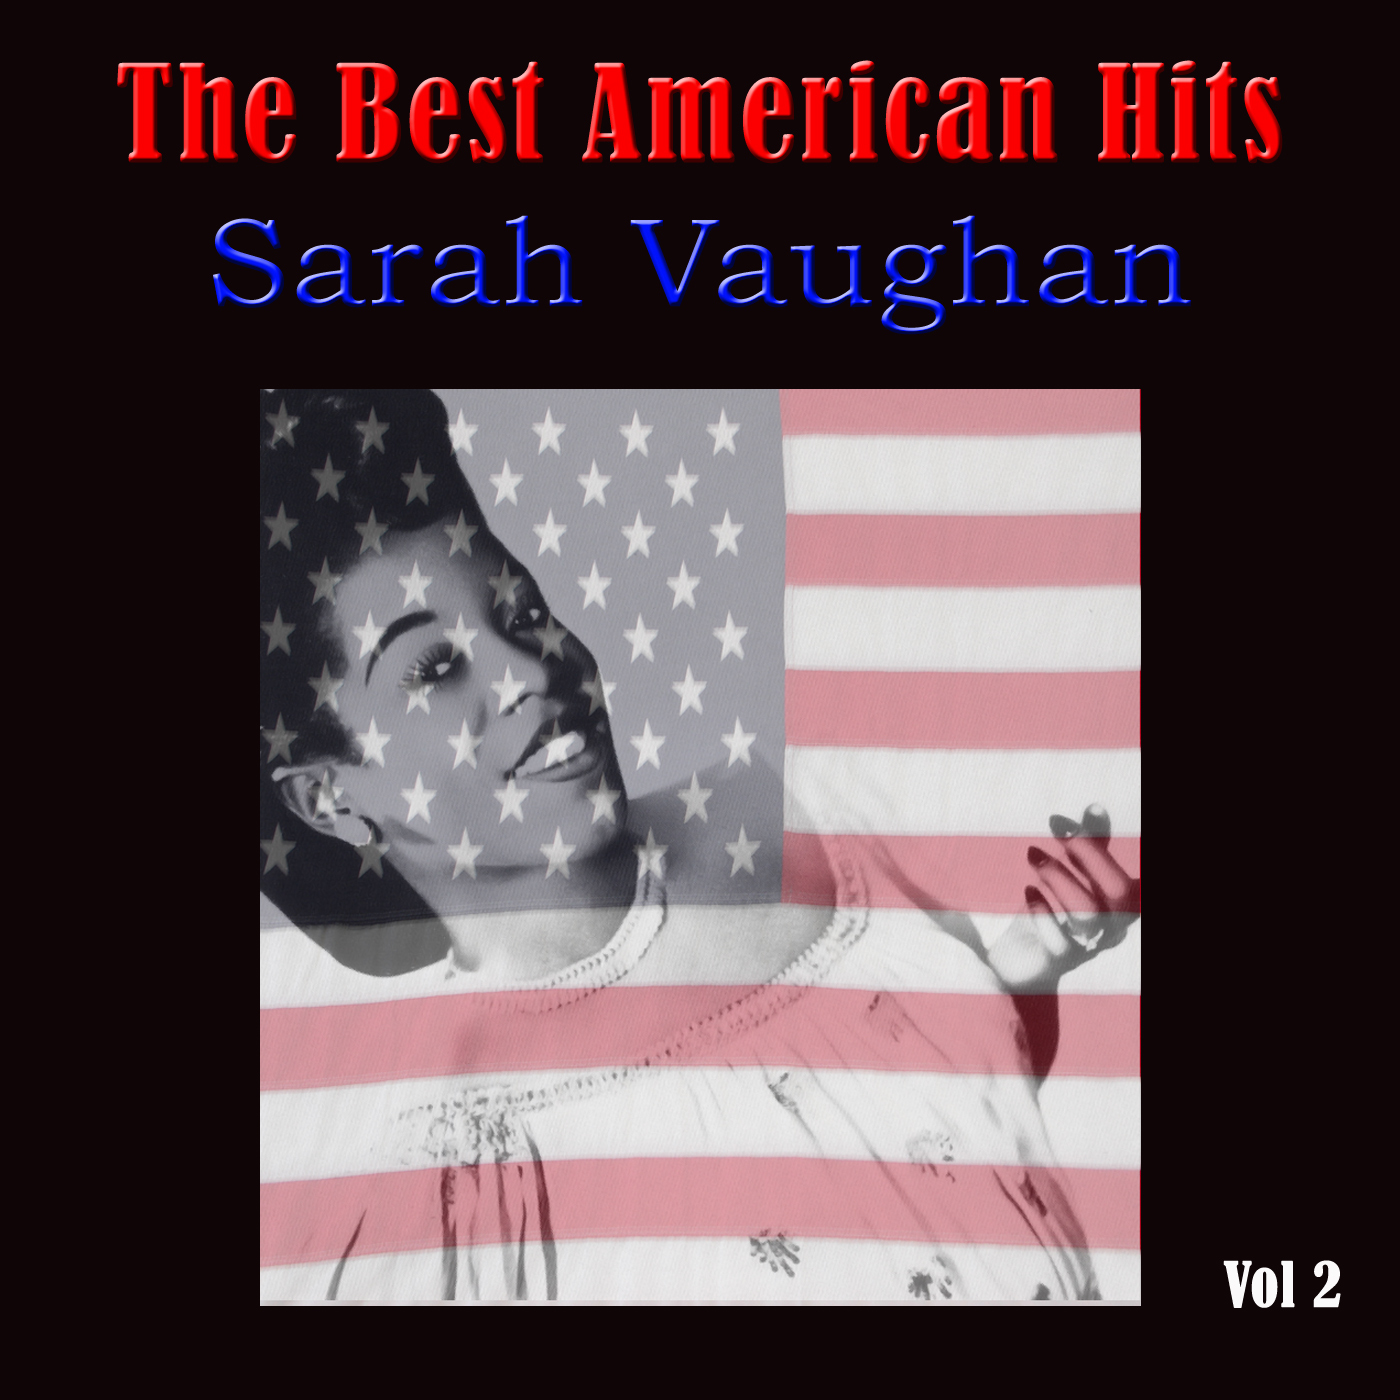 The Best American Hits Vol 2